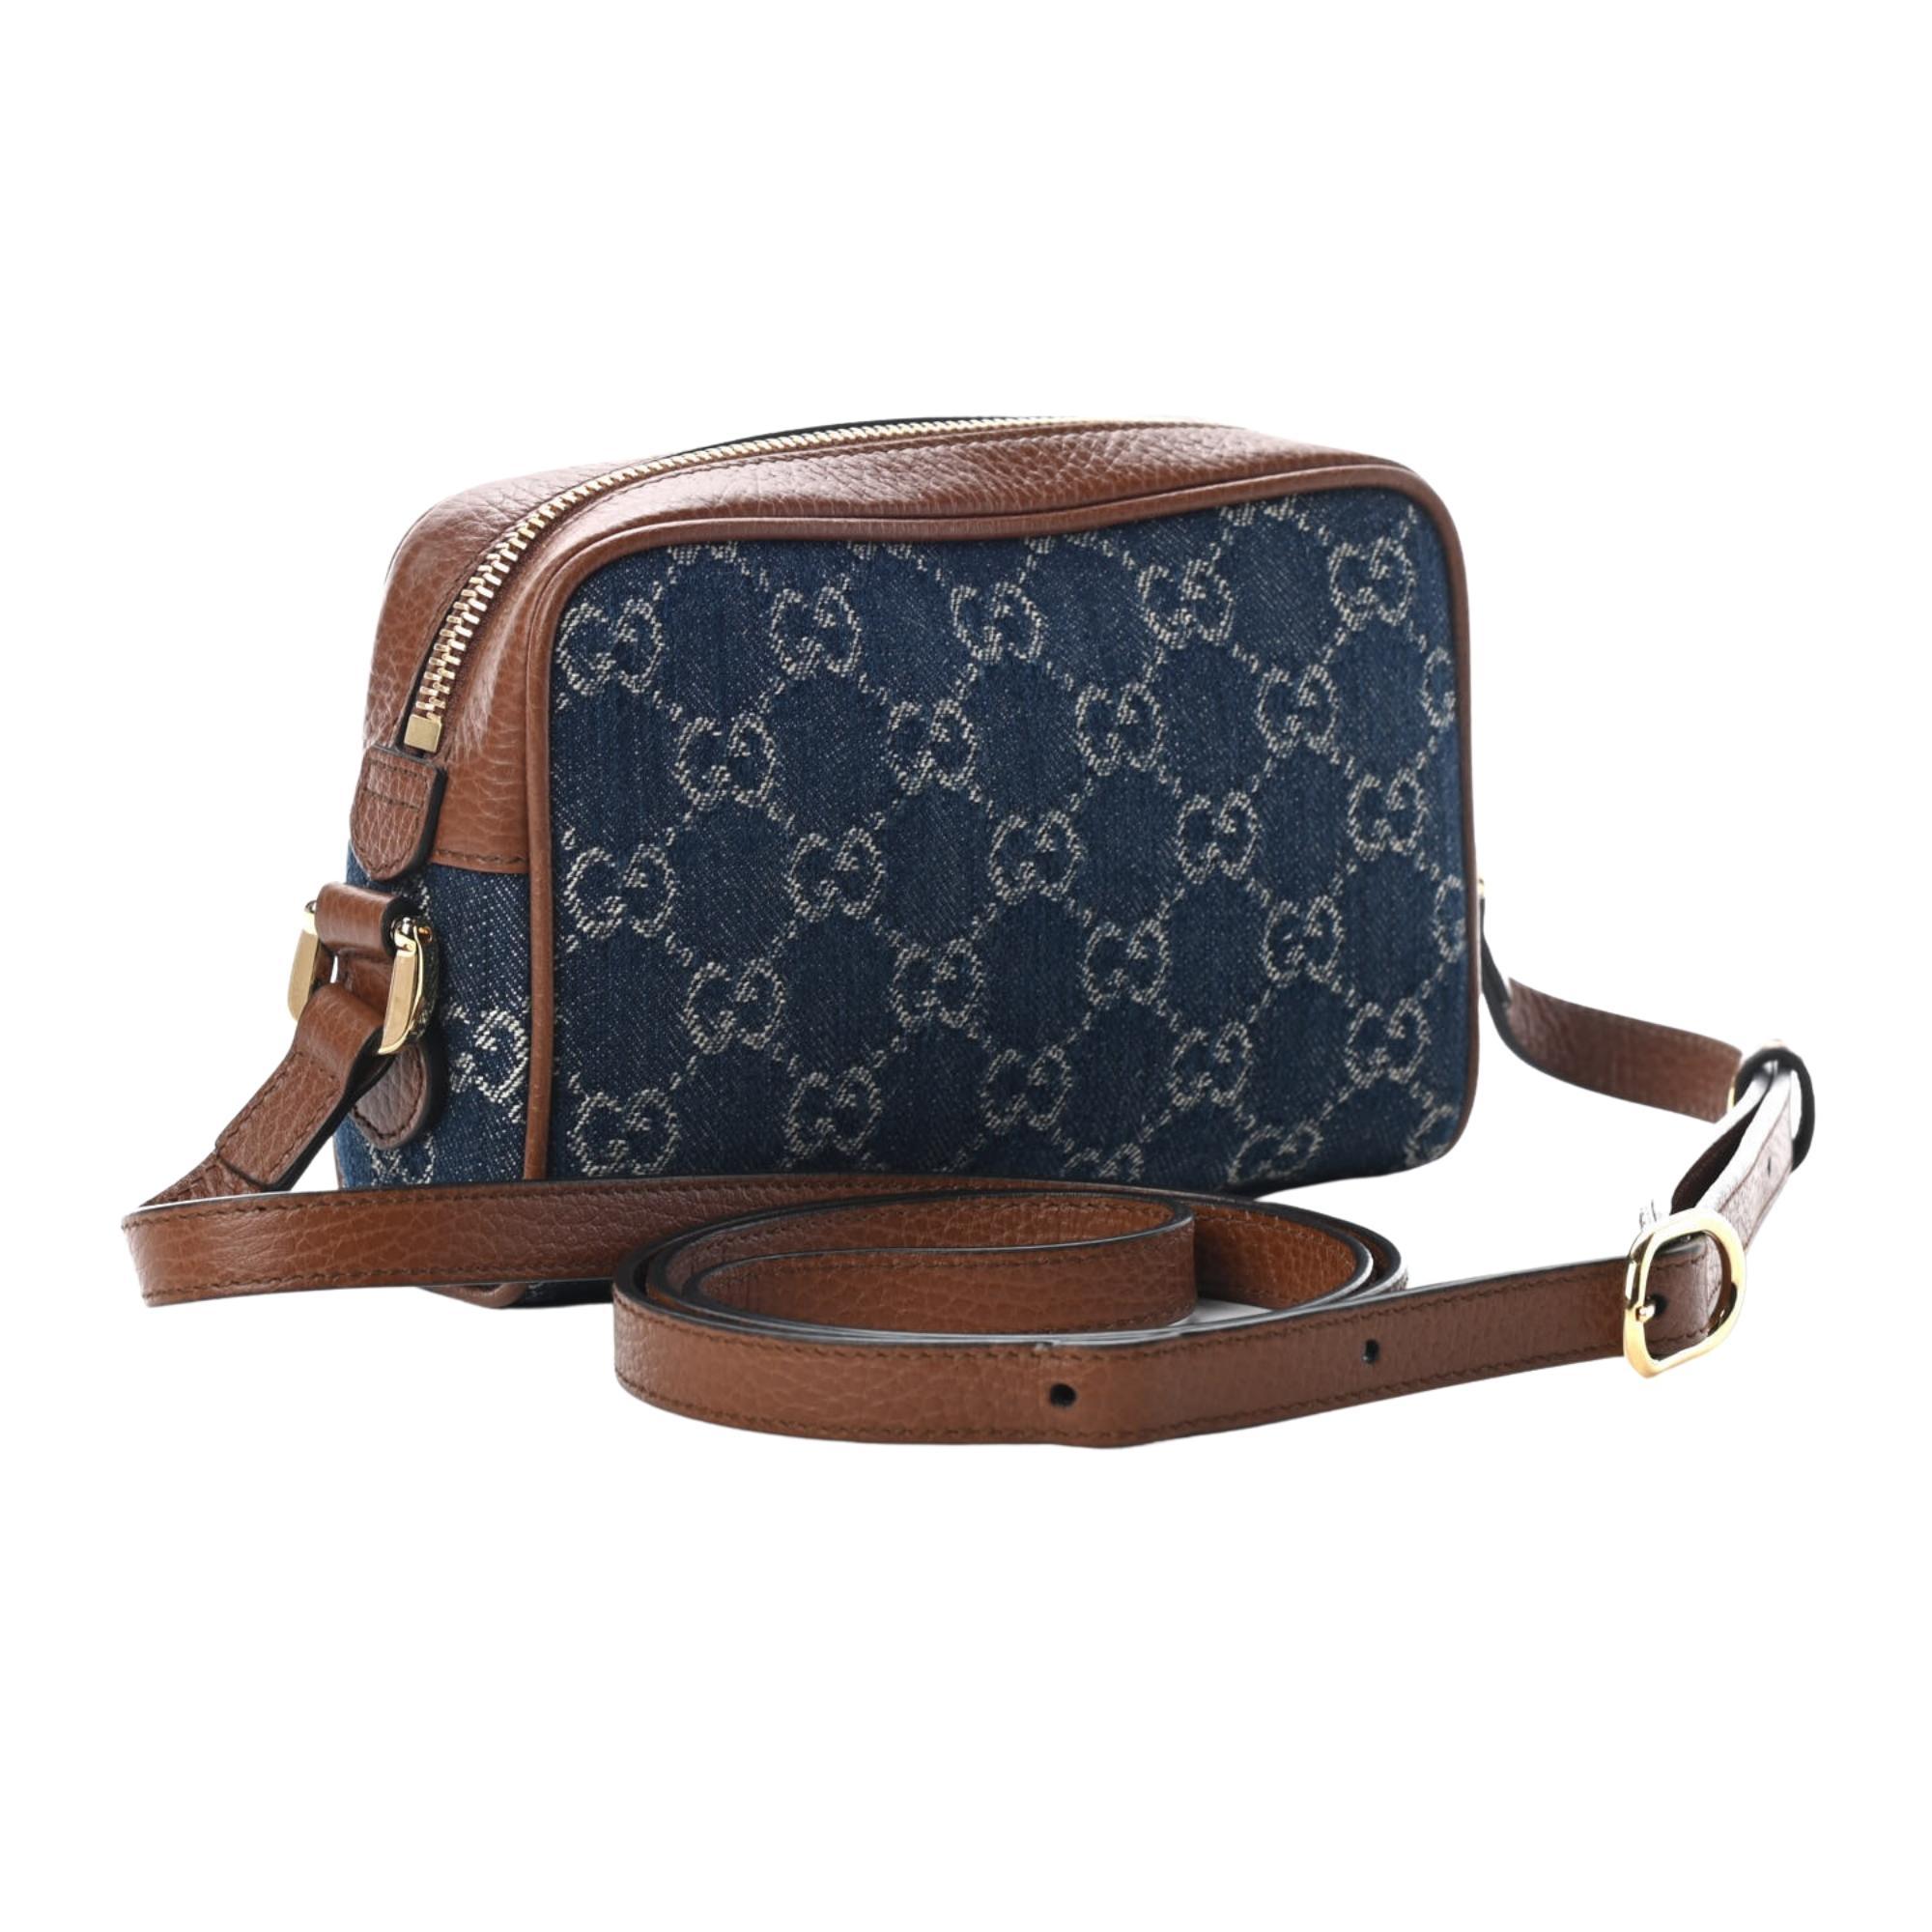 This camera-style bag is made of monogram GG jacquard dark blue denim with a soft construction. The bag features an enamelled GG logo detail, brown leather trim, gold-toned hardware, an attached key ring, a front zipper pocket, top zip closure, an